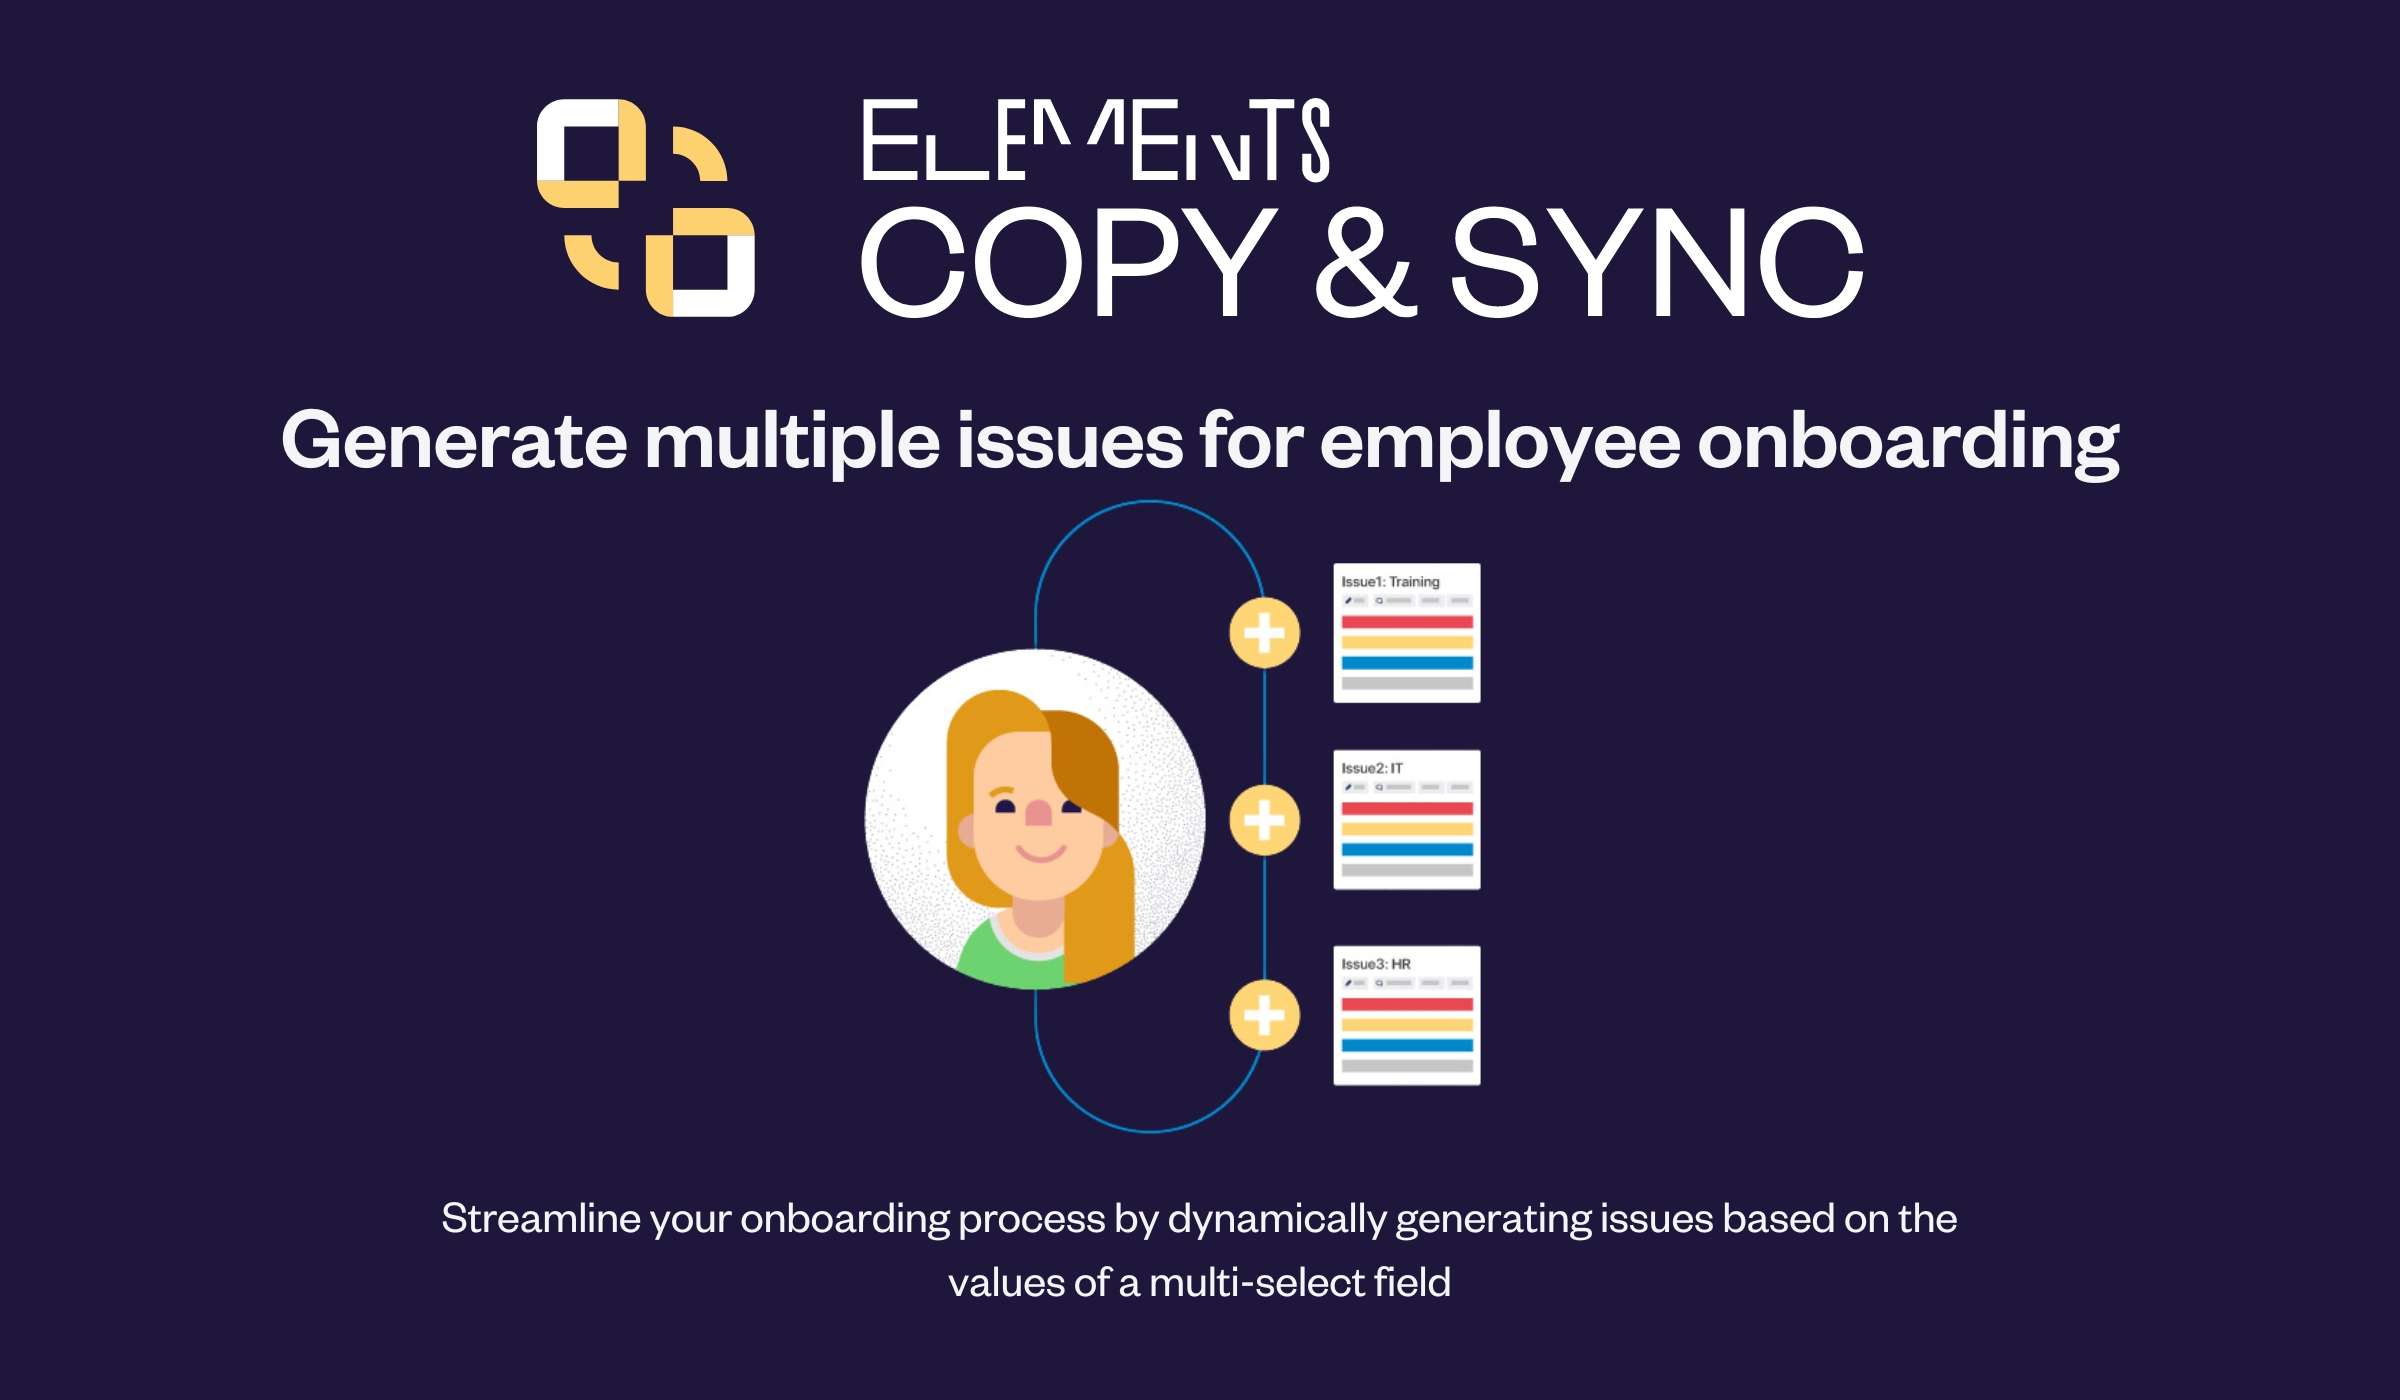 Elements Copy & Sync can help you streamline your onboarding process in Jira. Let's see how by dynamically generating multiple issues at once, based on the values of a multi-select field.